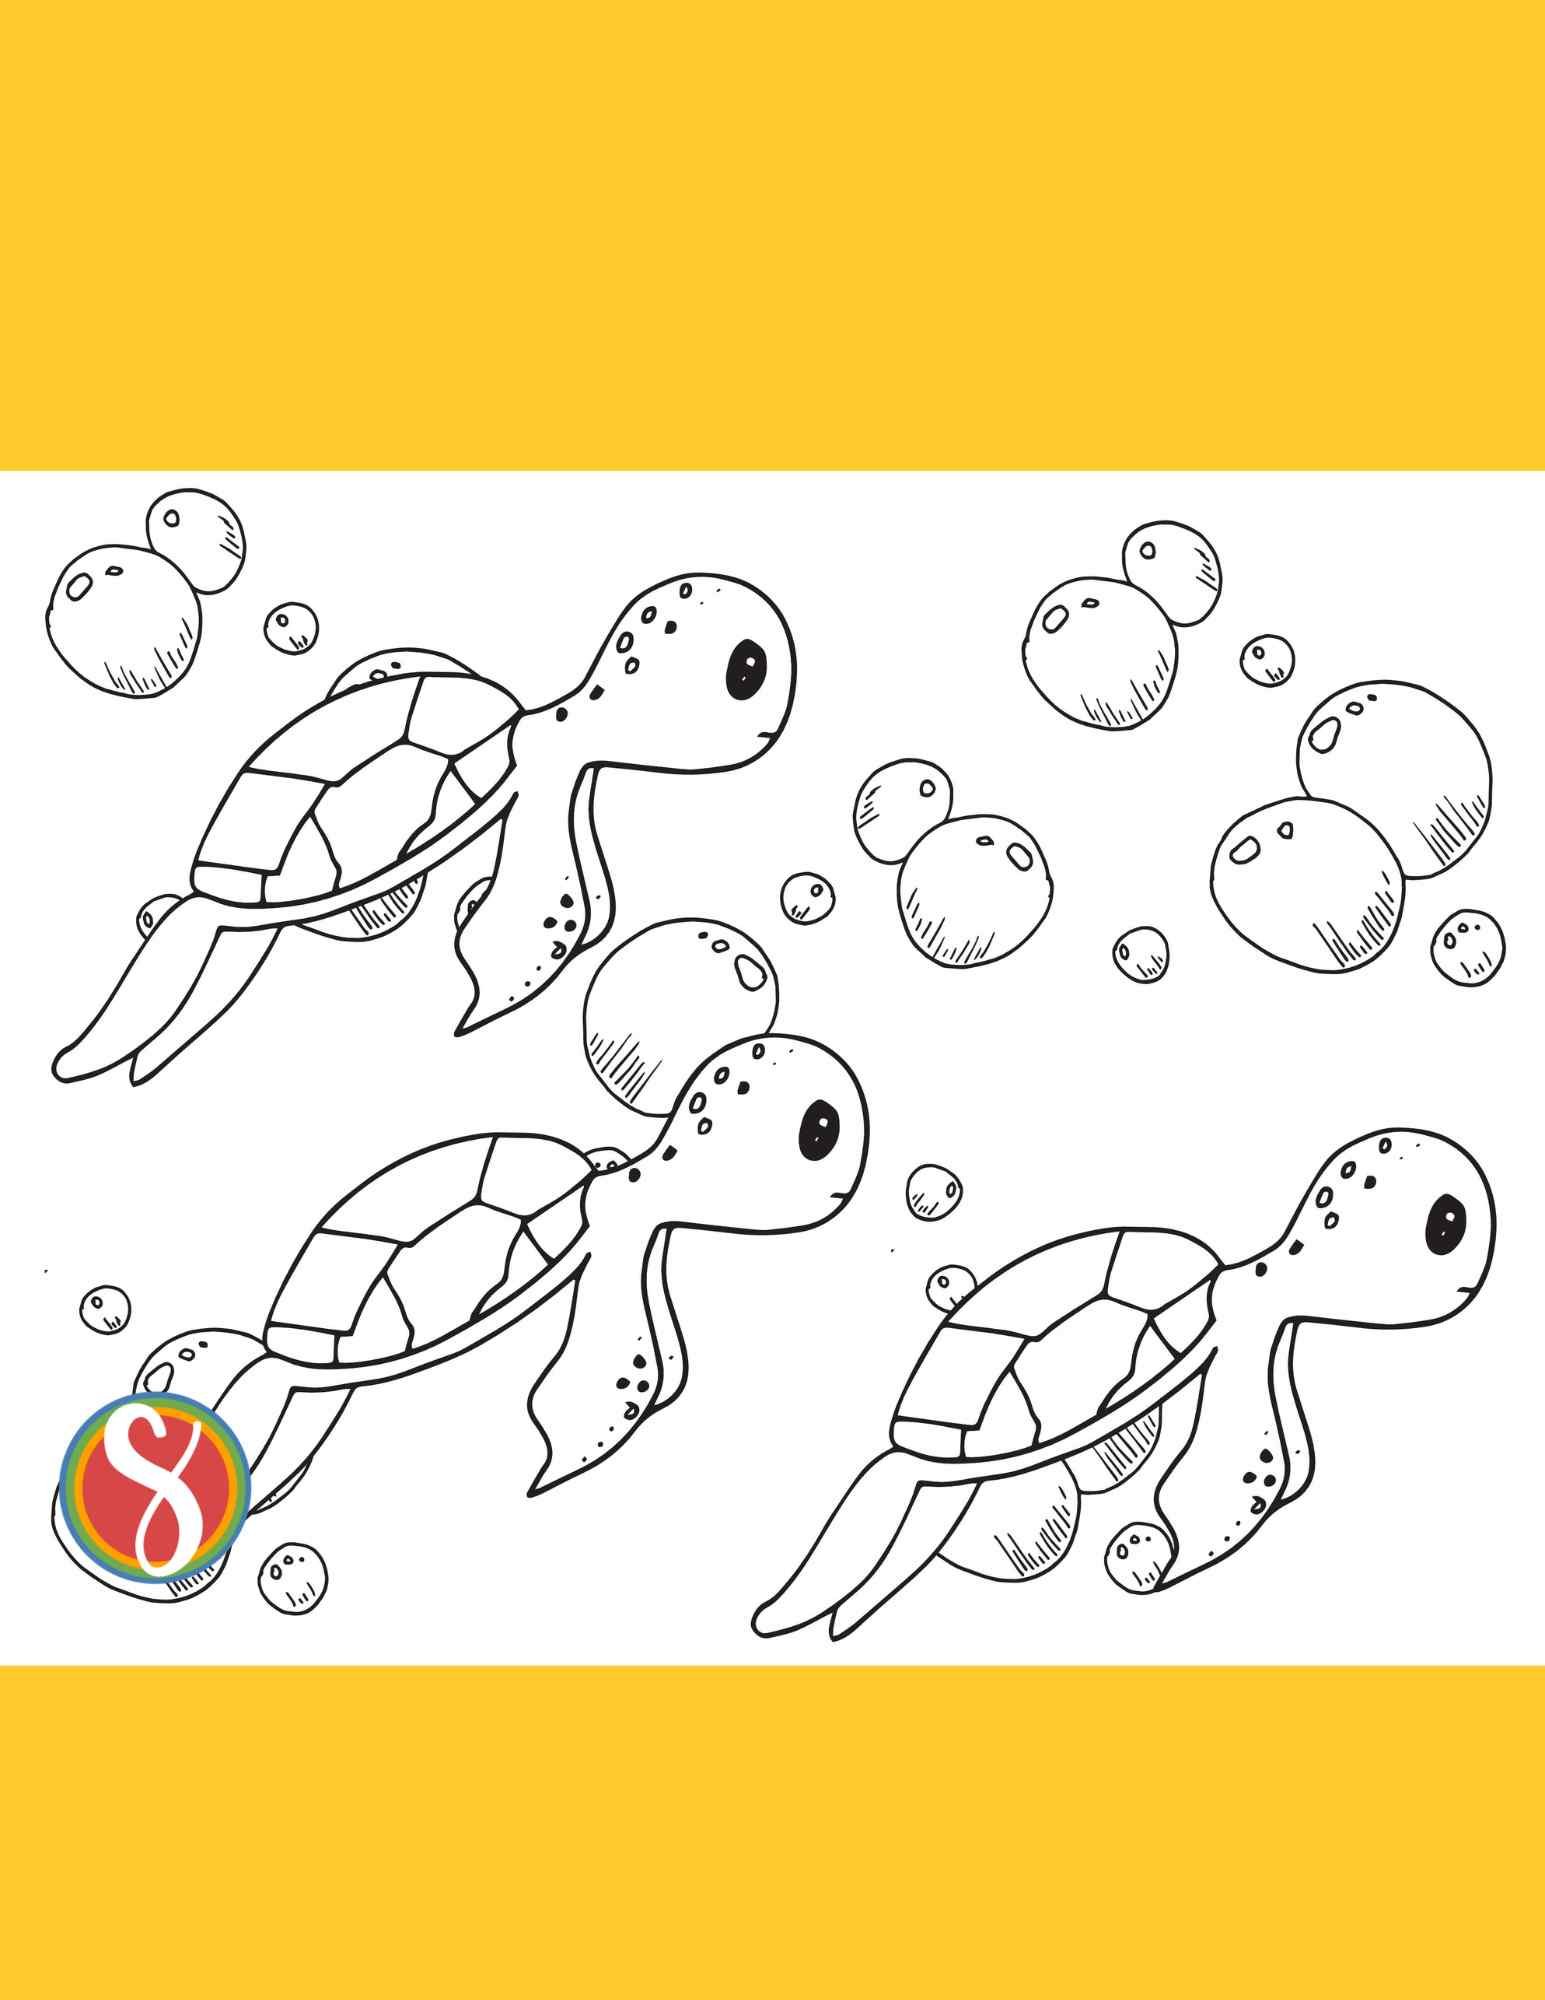 3 identical turtle drawings to color with a background of colorable bubbles